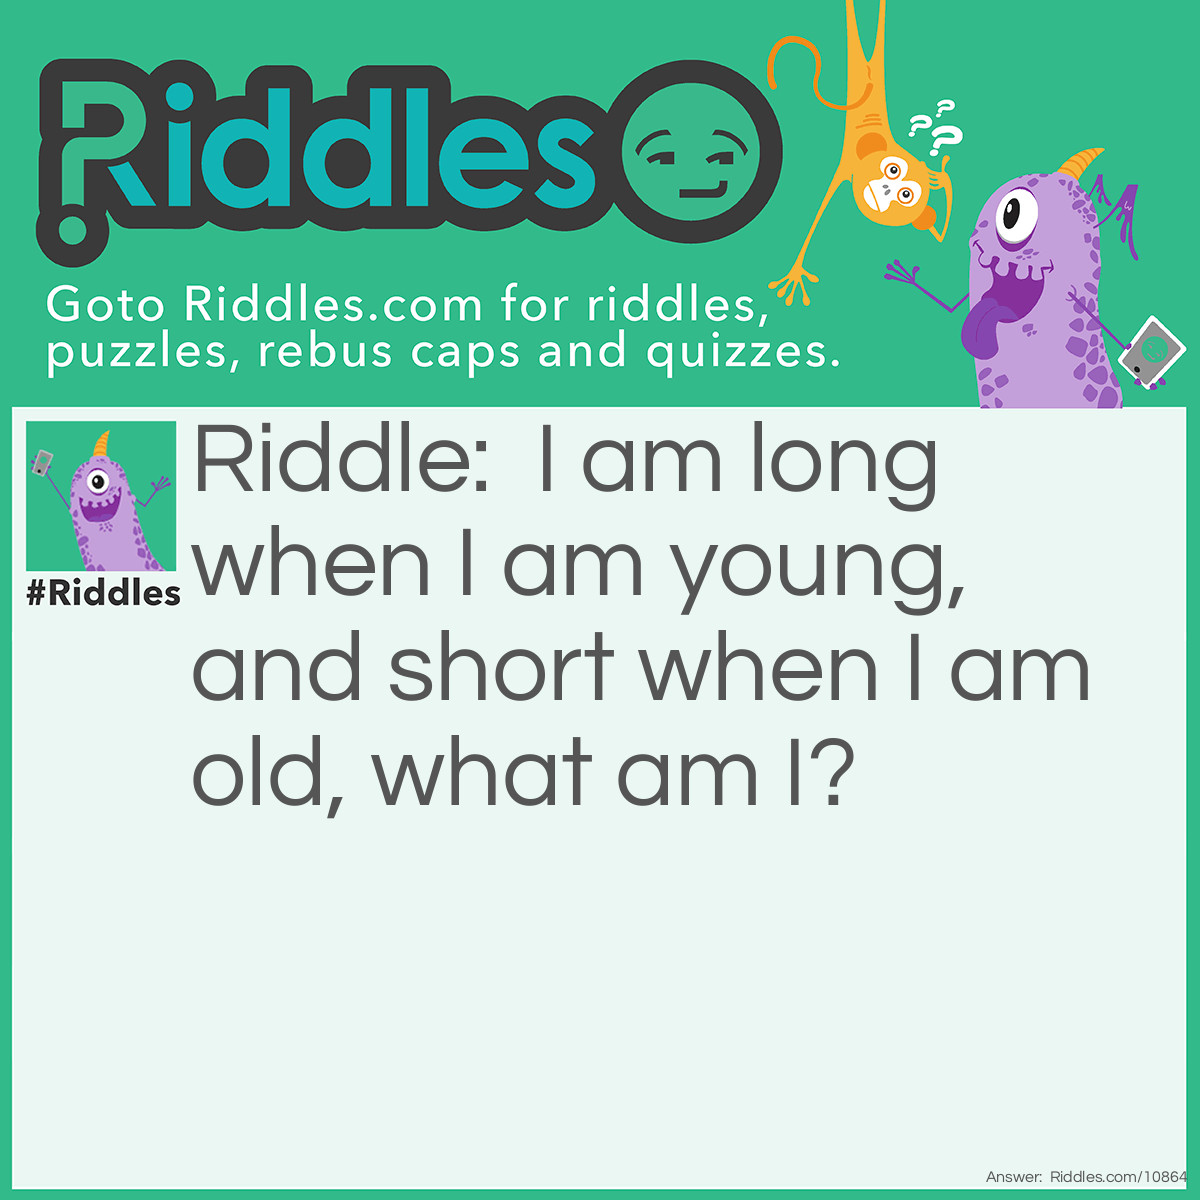 Riddle: I am long when I am young, and short when I am old, what am I? Answer: A pencil.